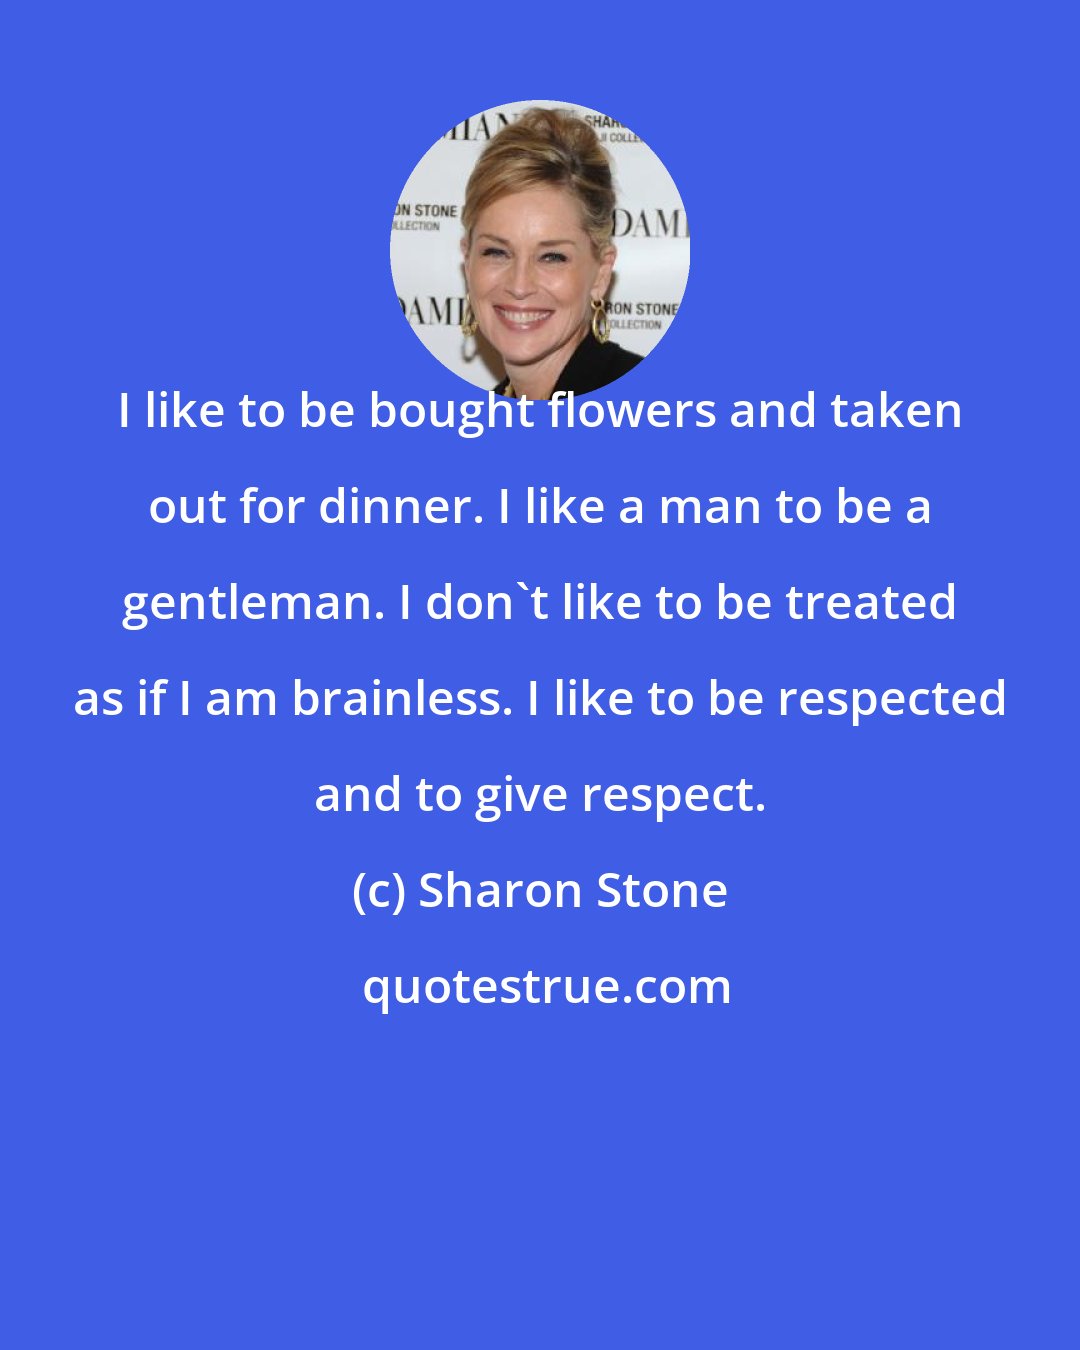 Sharon Stone: I like to be bought flowers and taken out for dinner. I like a man to be a gentleman. I don't like to be treated as if I am brainless. I like to be respected and to give respect.